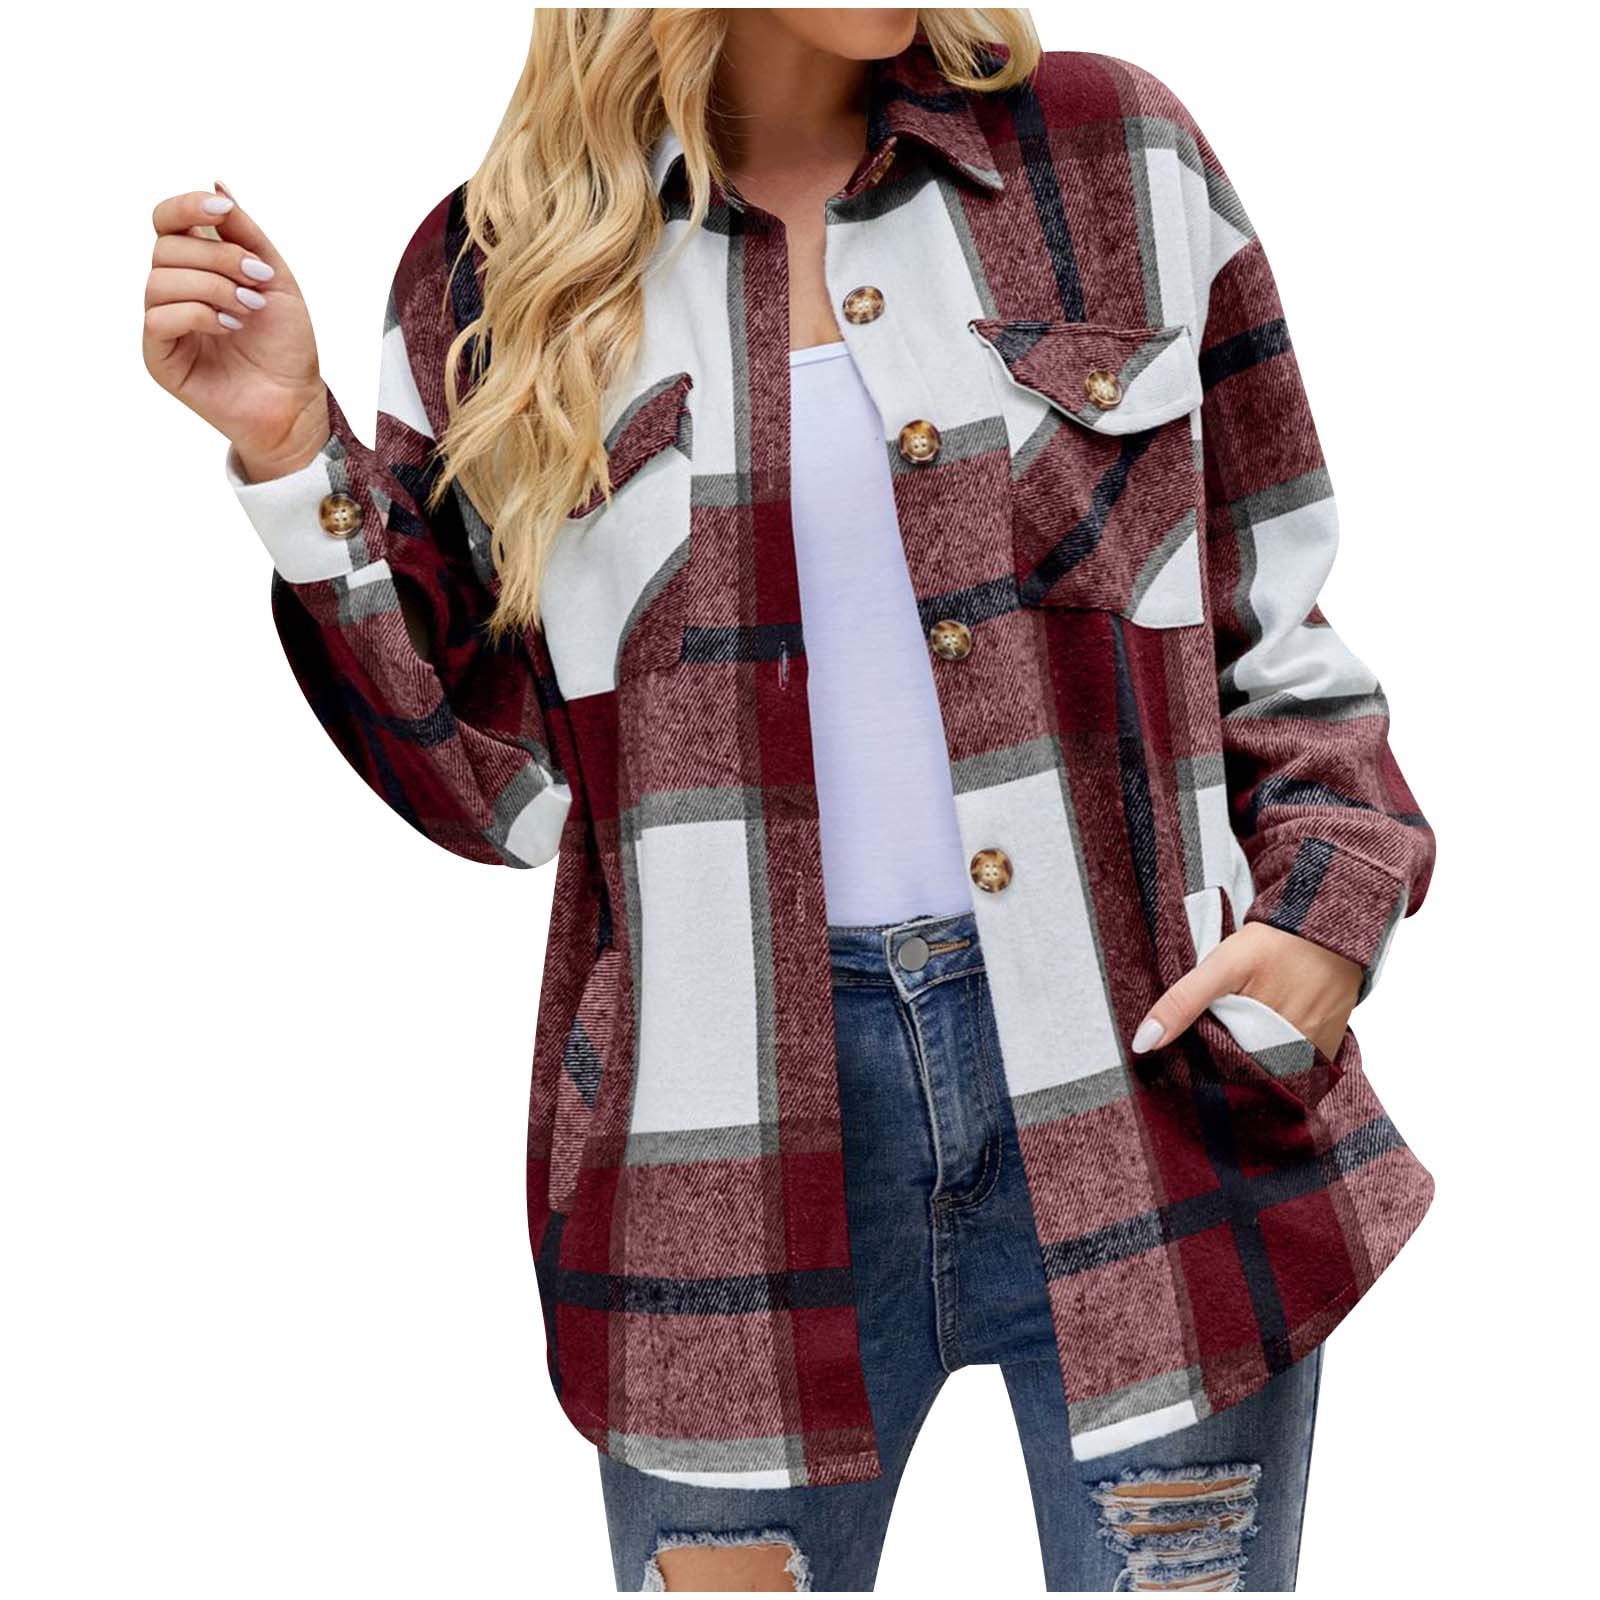 XFLWAM Womens Plaid Shacket Casual Flannel Shirt Long Sleeve Coat Button  Down Fall Jacket Shacket with Pocket Wine Red S 